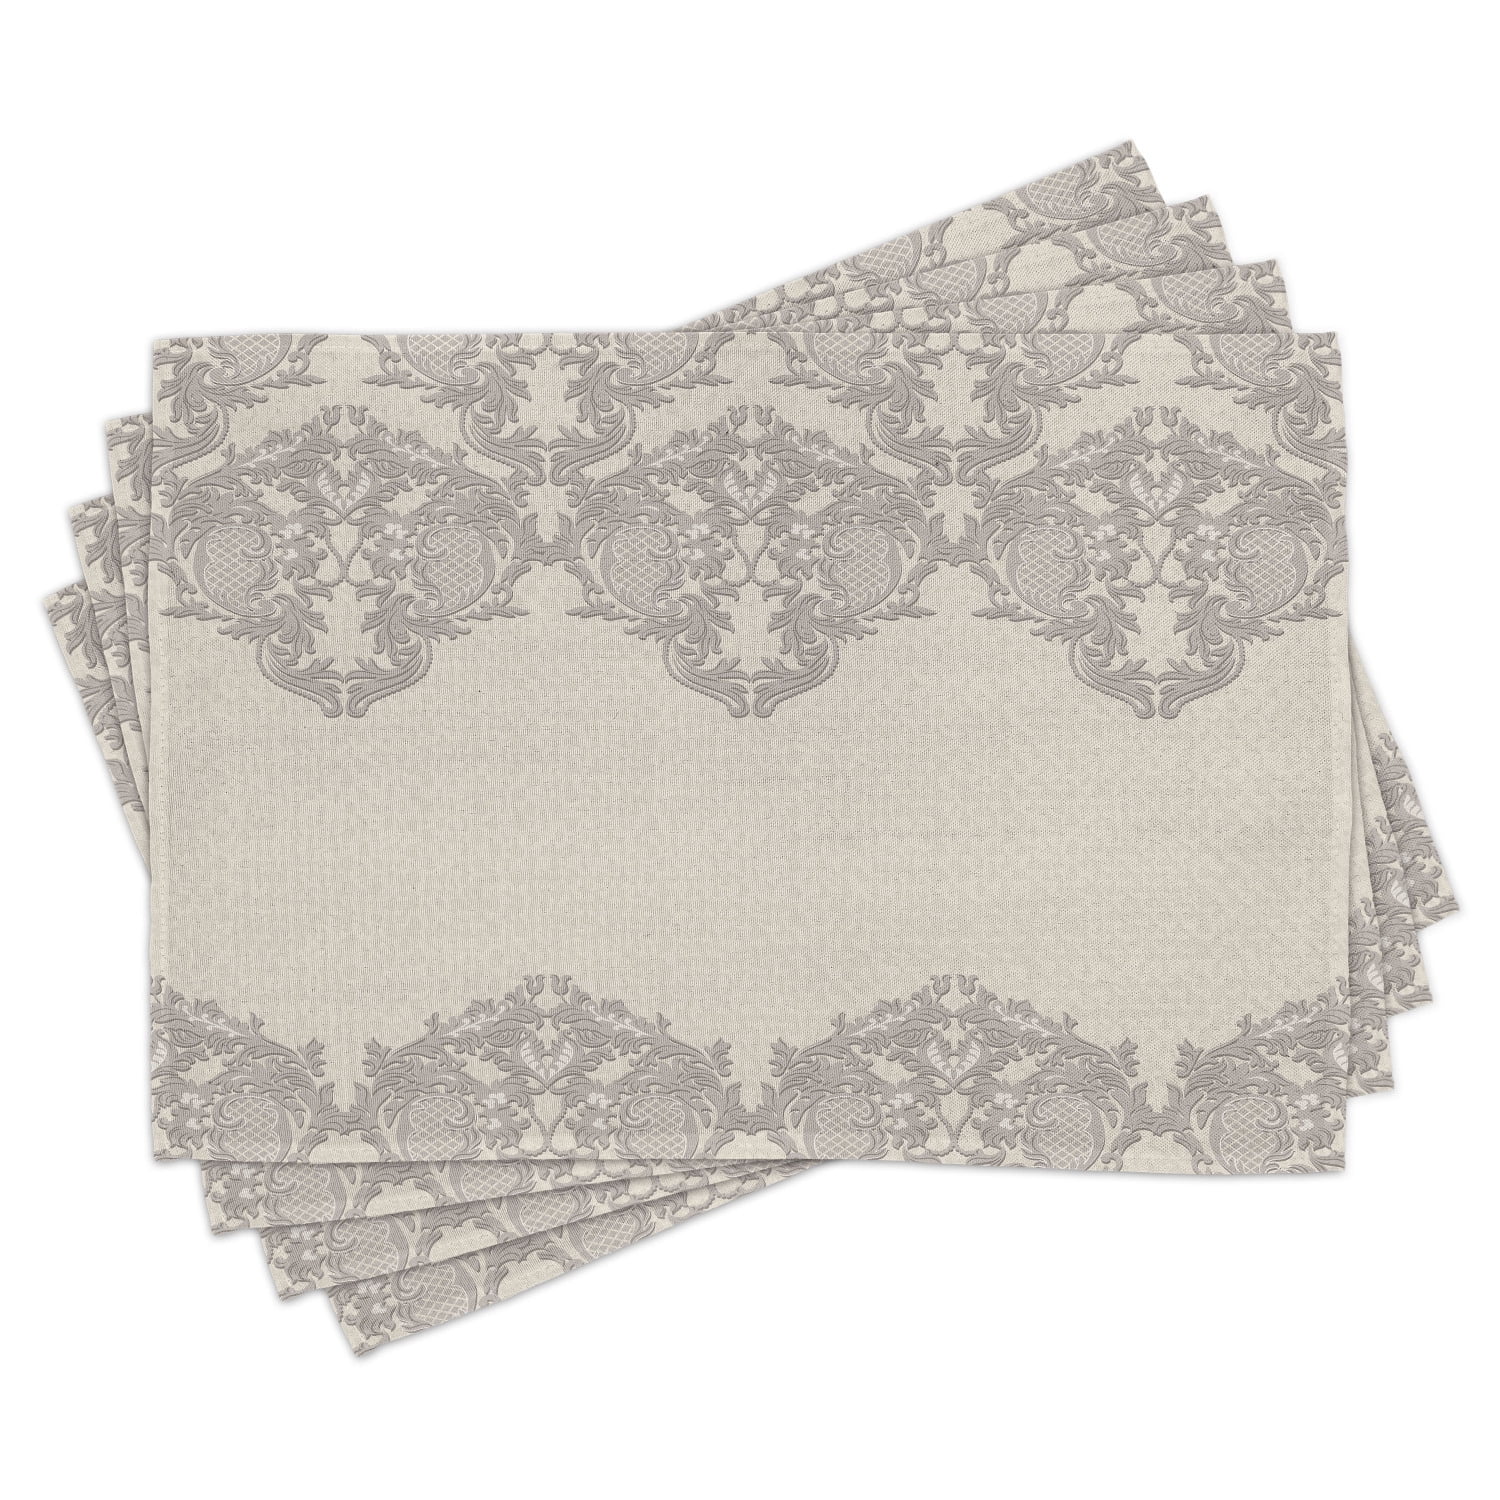 Taupe Lace Like Framework Borders with Details Delicate Intricate Retro Dated Print Washable Fabric Placemats for Dining Room Kitchen Table Decor Ambesonne Taupe Place Mats Set of 4